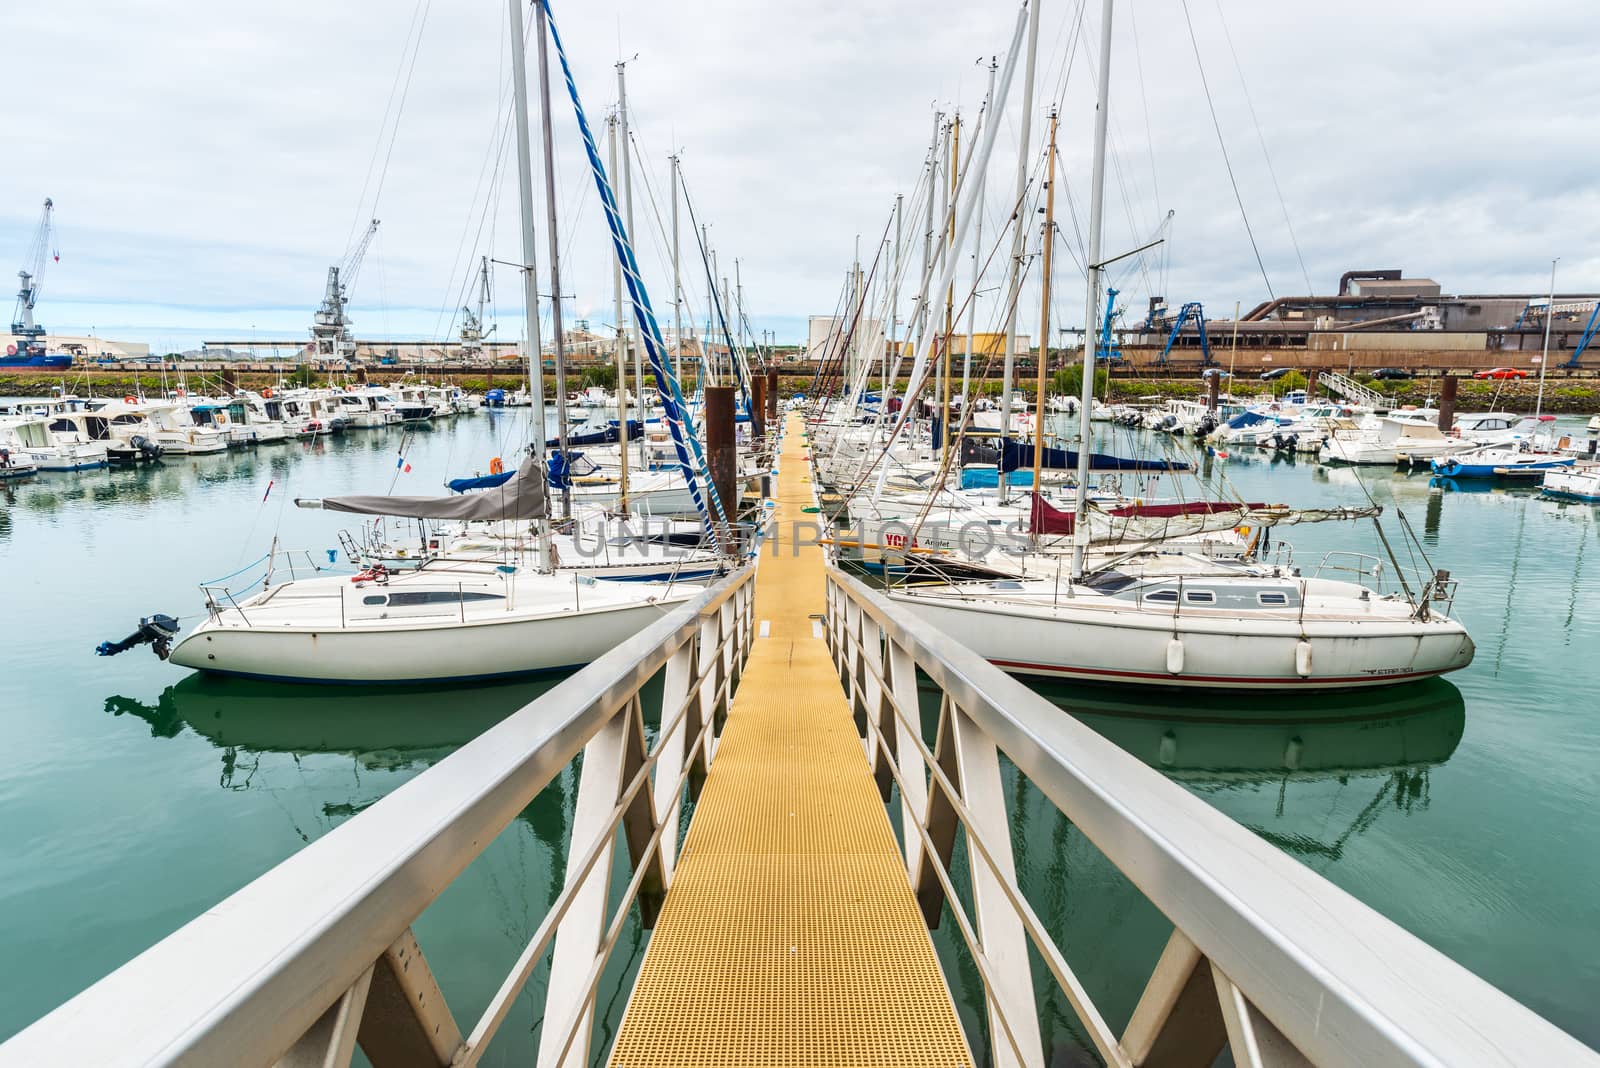 Brise-Lames marina in Anglet, France by dutourdumonde